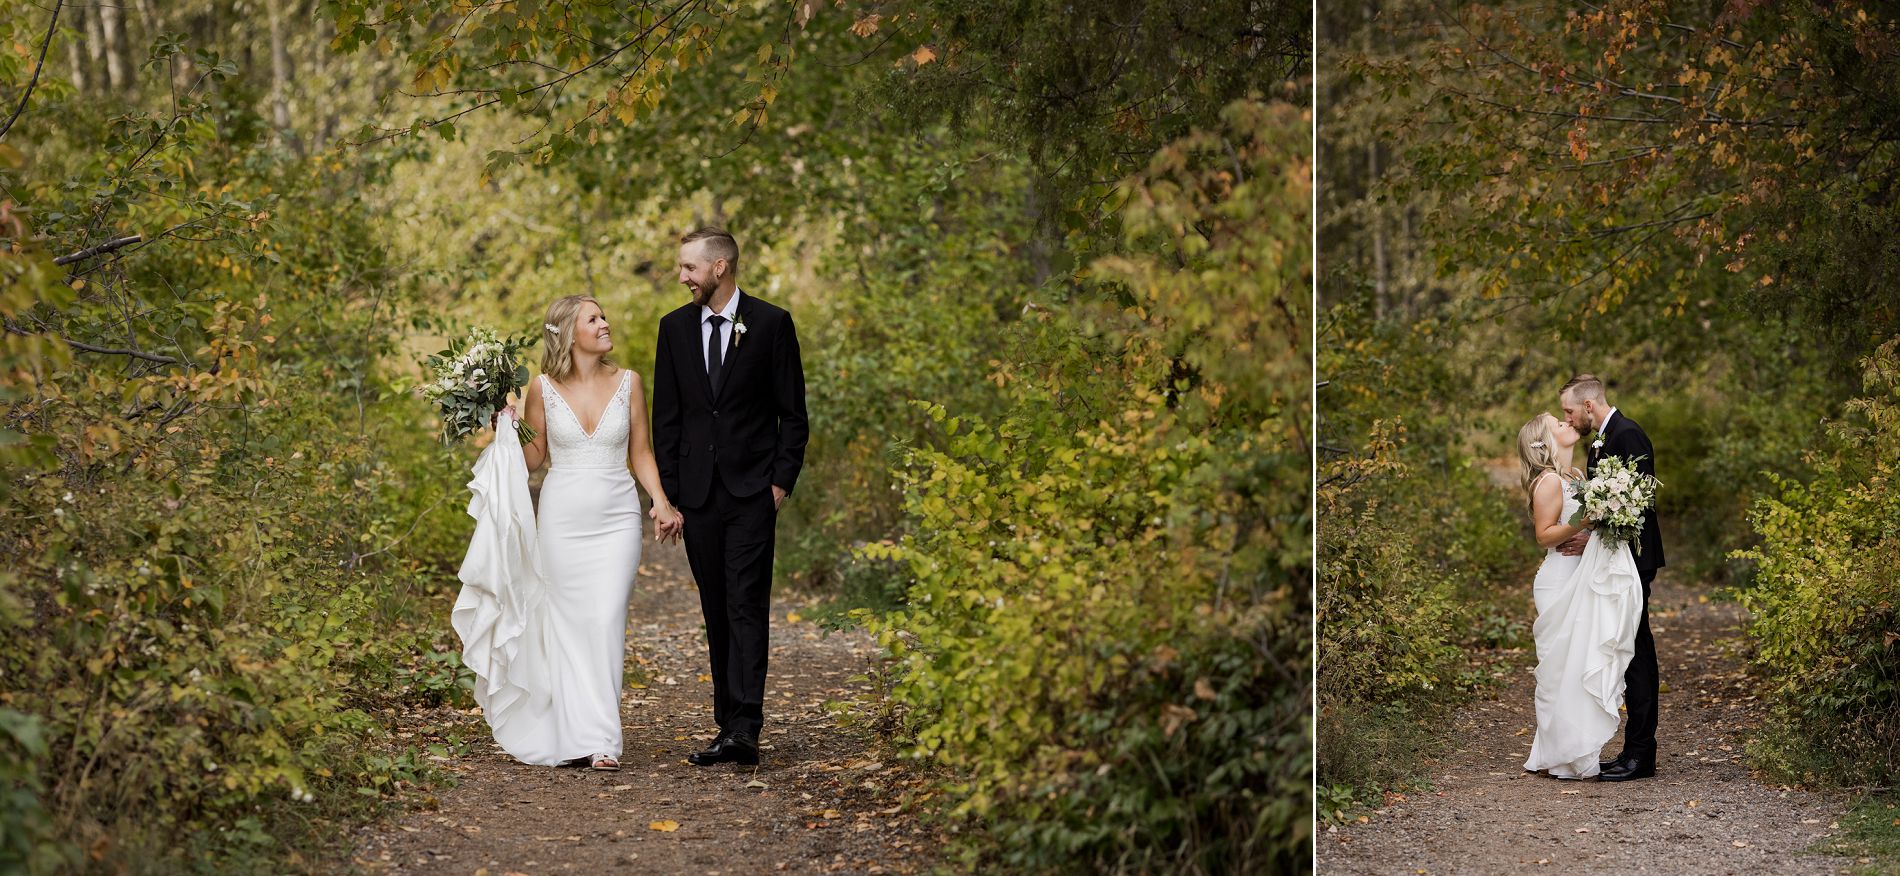 bride and groom photos at fintry provincial park in autumn